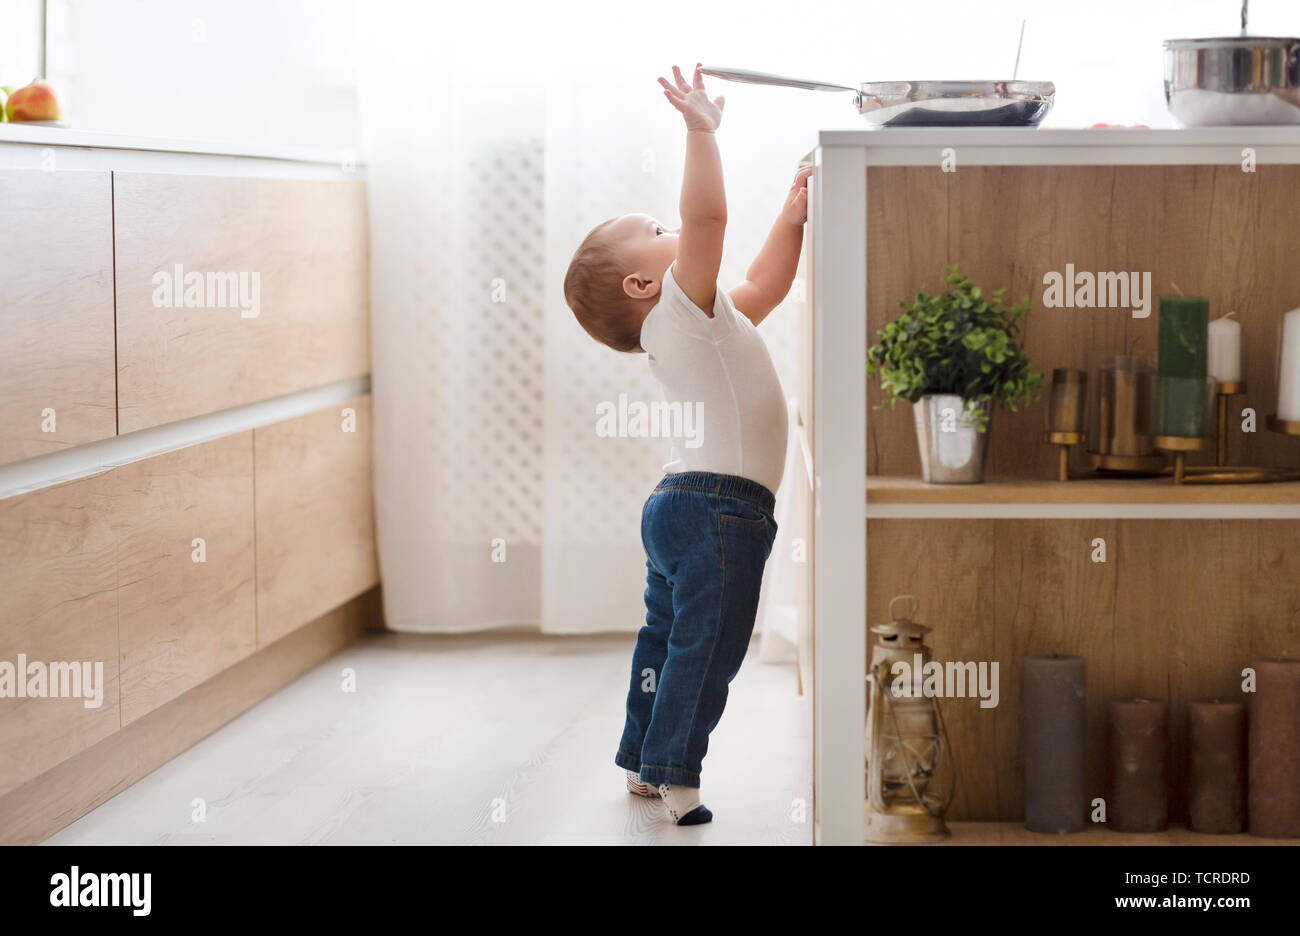 child safety at home concept - toddler reaching for pan on the stove in kitchen Stock Photo